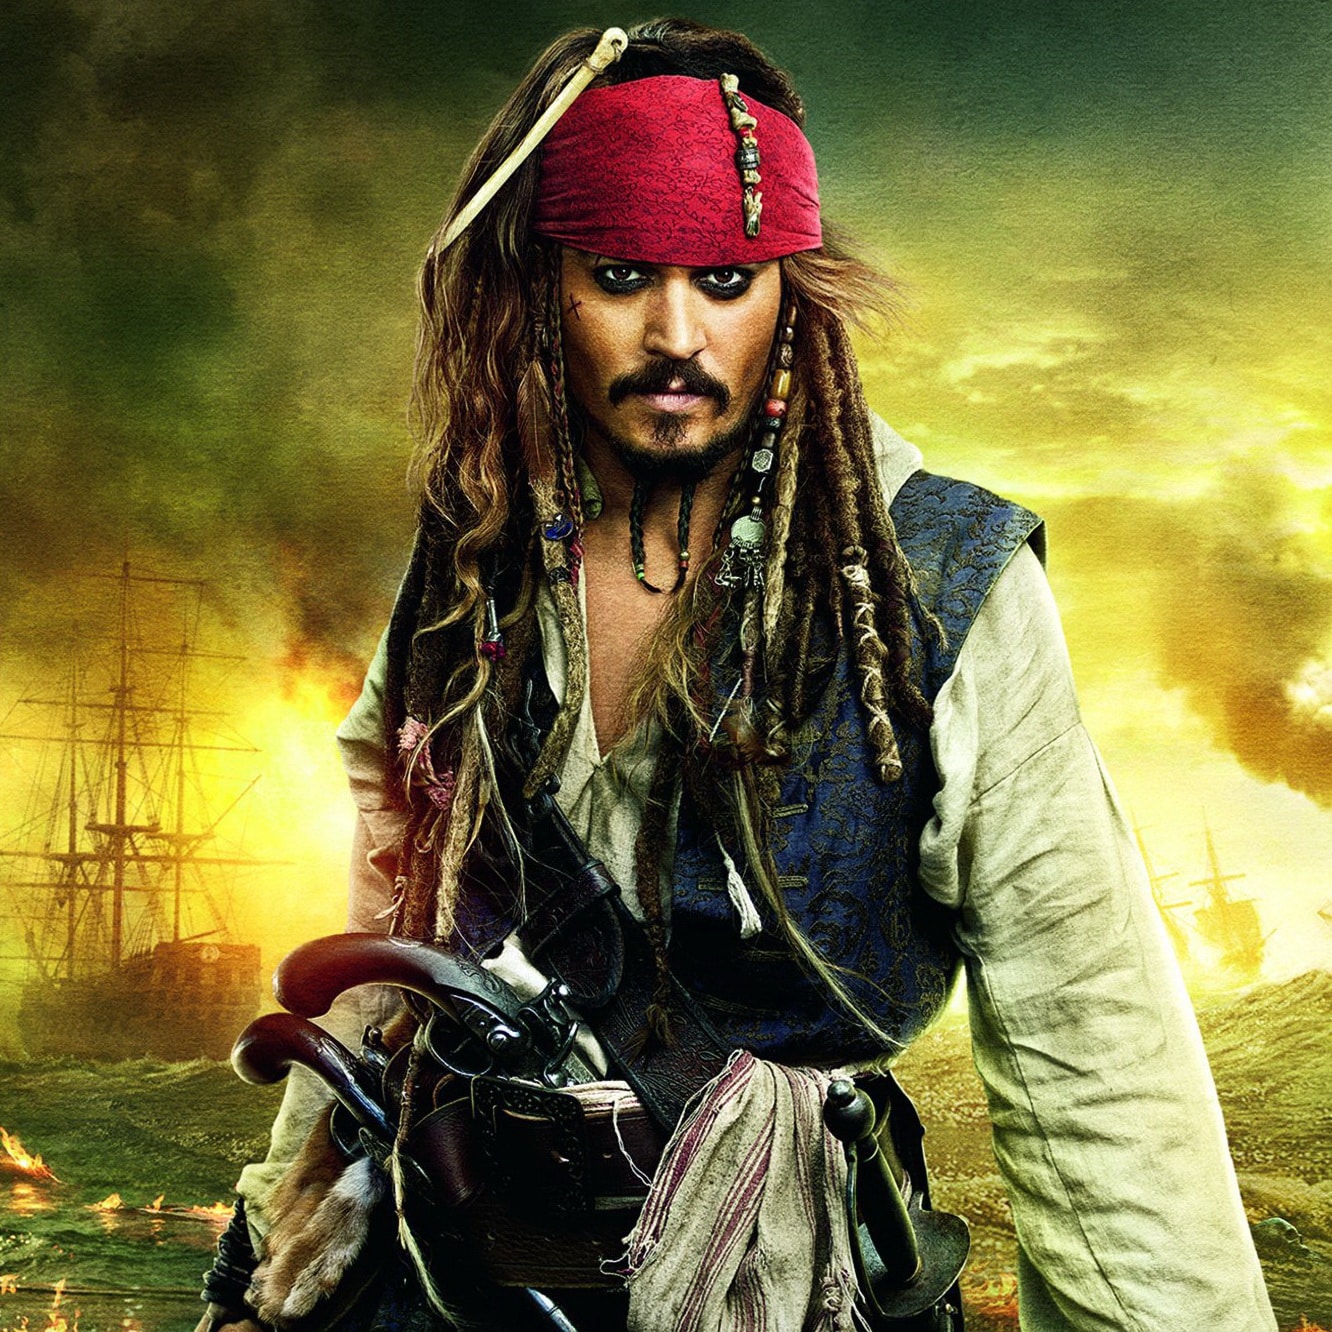 Pirates of the caribbean the curse of the black pearl - apimyte